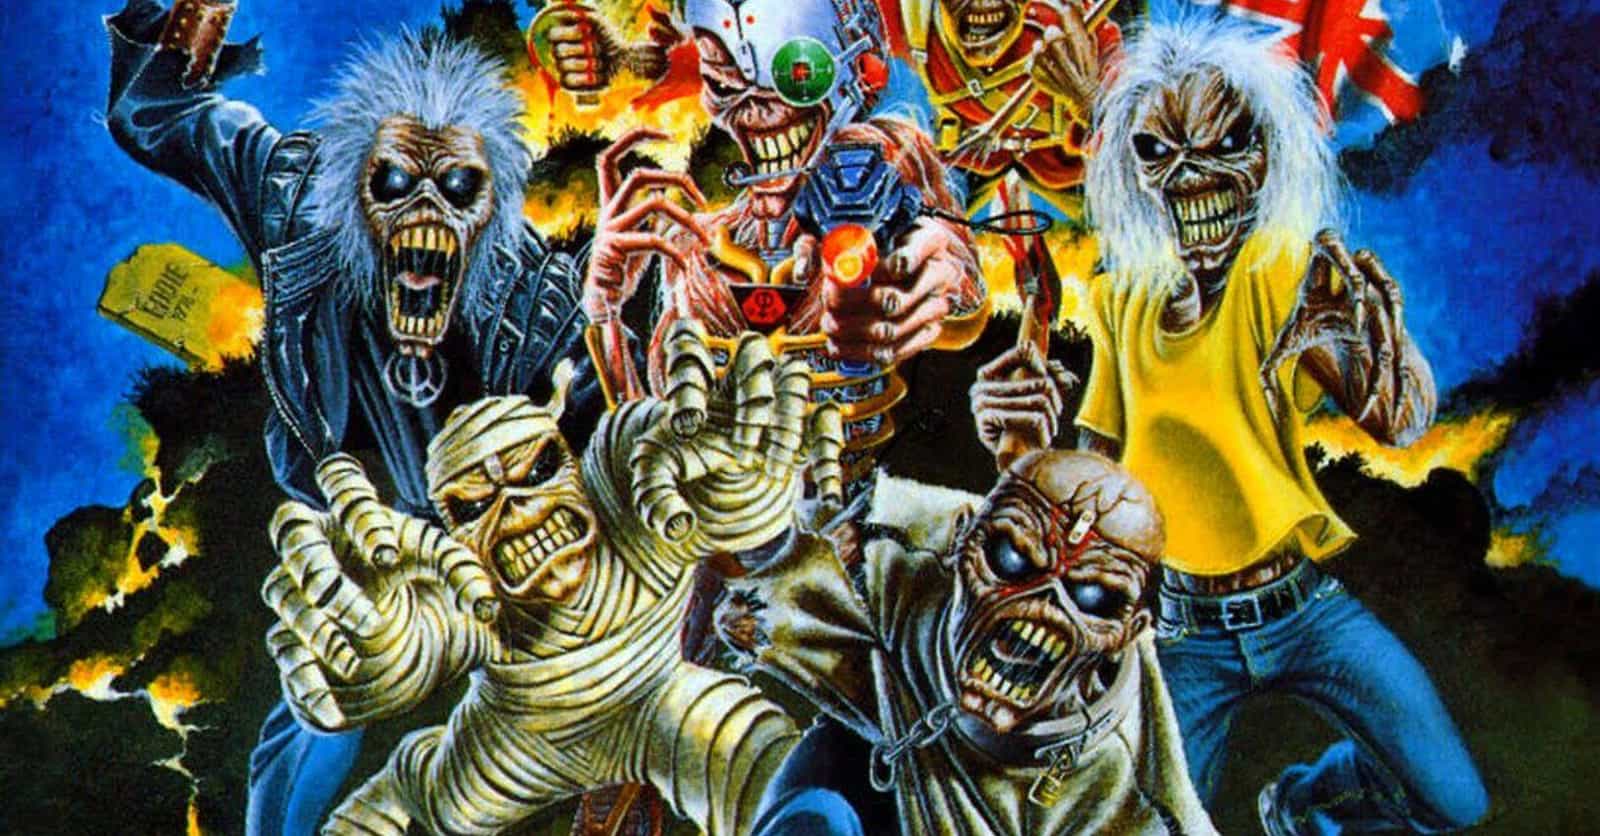 Here Are All The Craziest Facts You Didn't Know About Iron Maiden